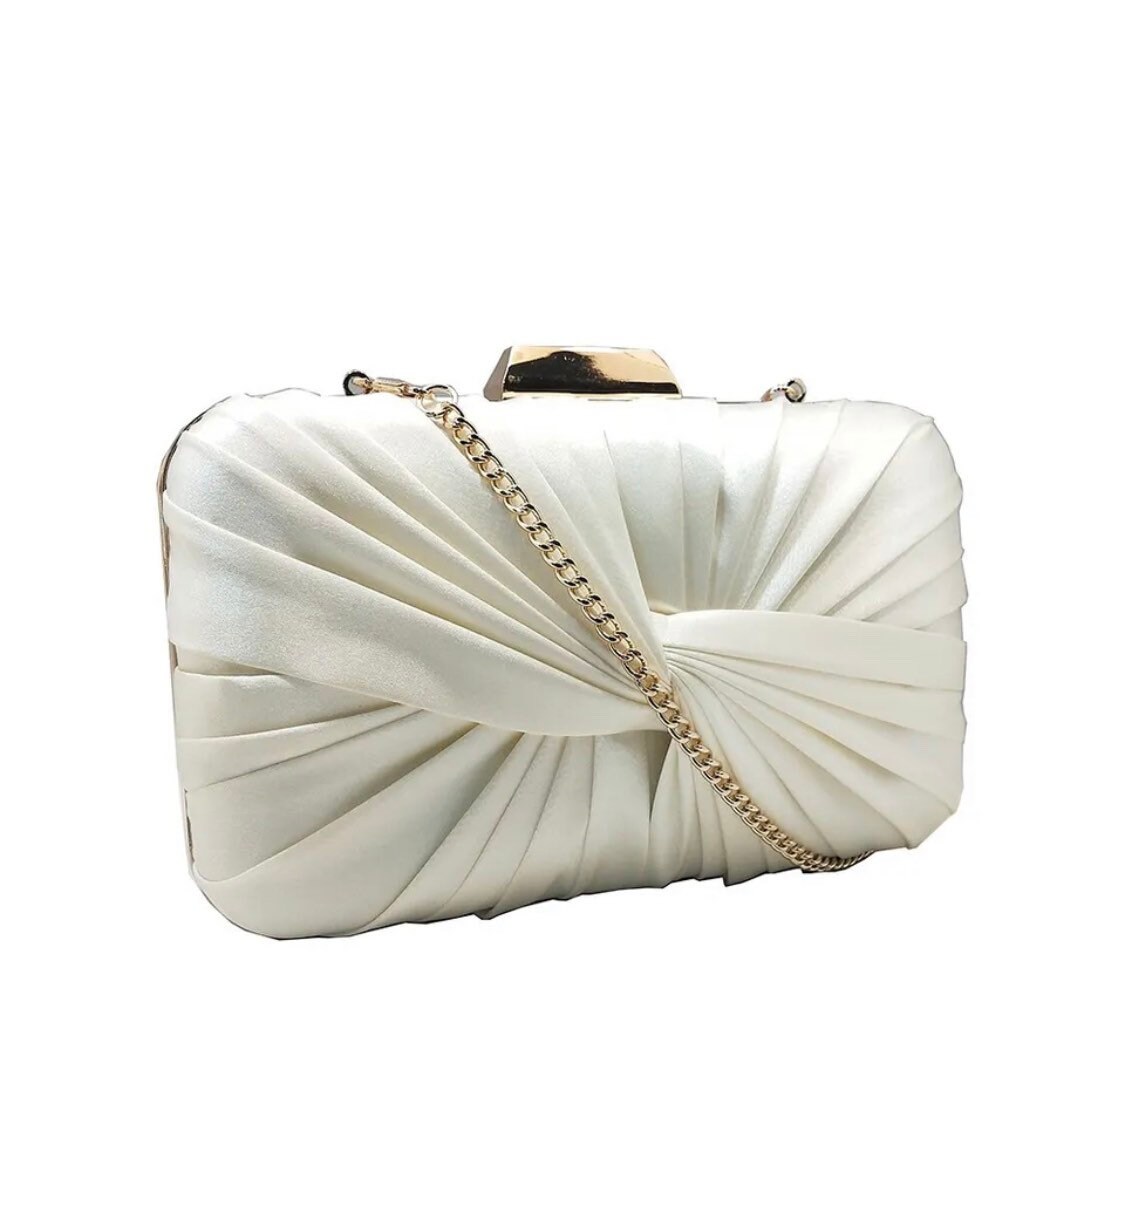 Satin Ivory Clutch Bag With Gold Strap - Etsy